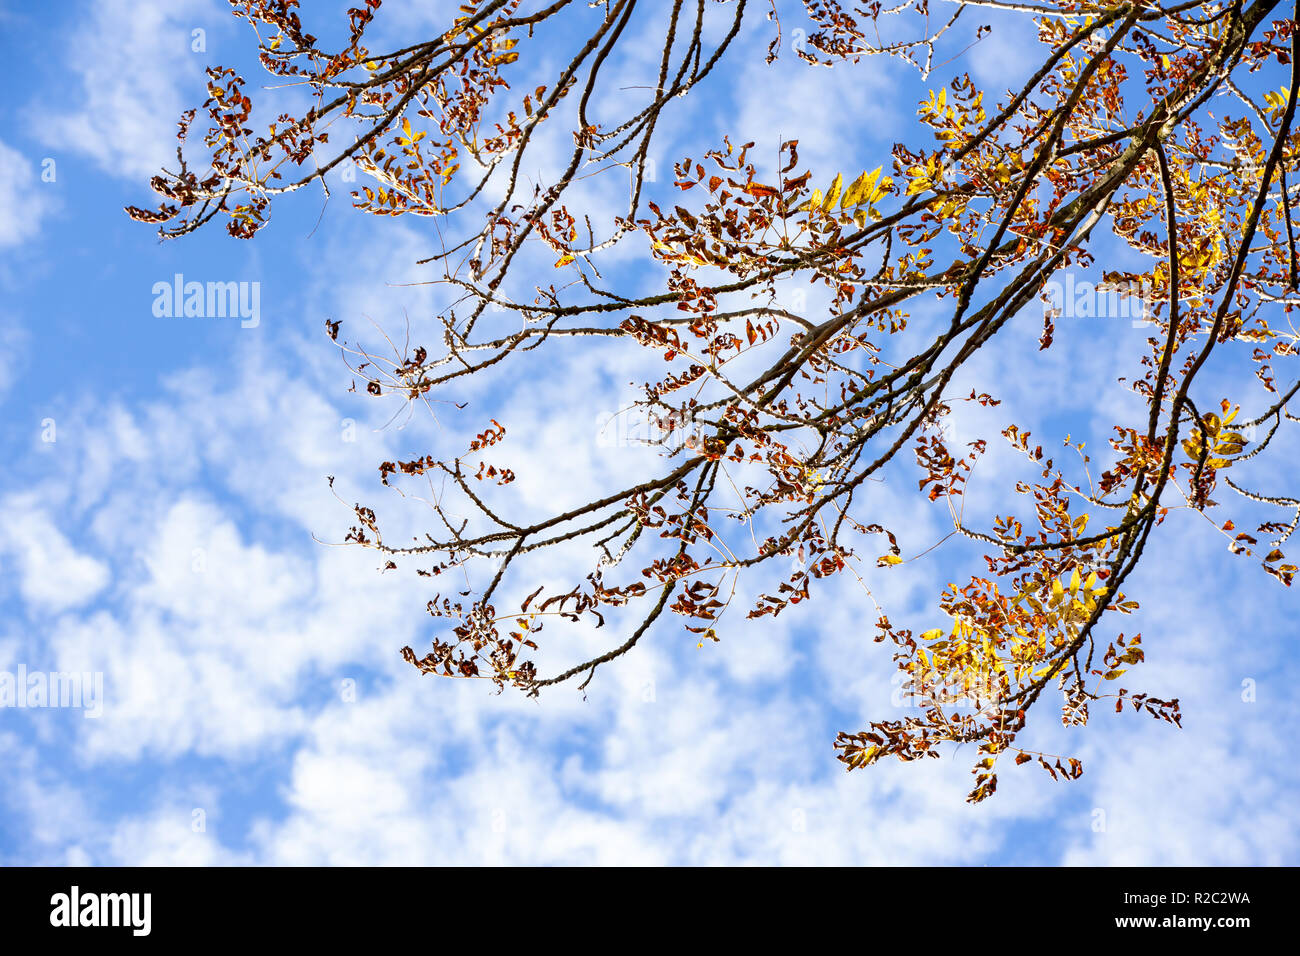 Autumn tree branches with yellow leaves and blue sky Stock Photo